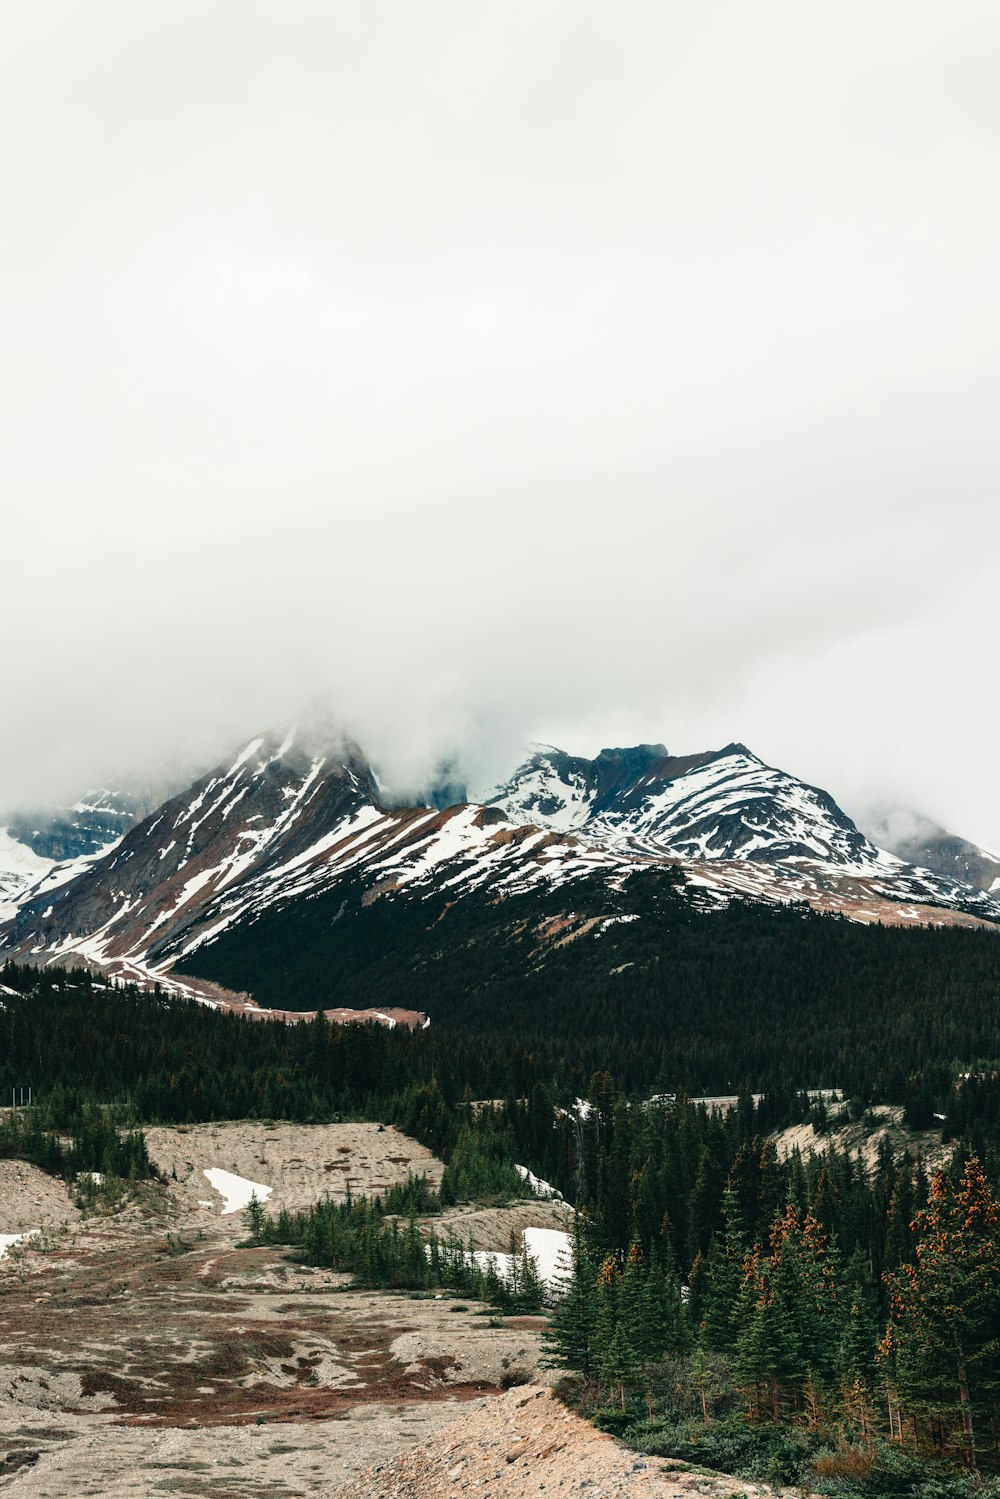 a view of a mountain range with snow on the mountains